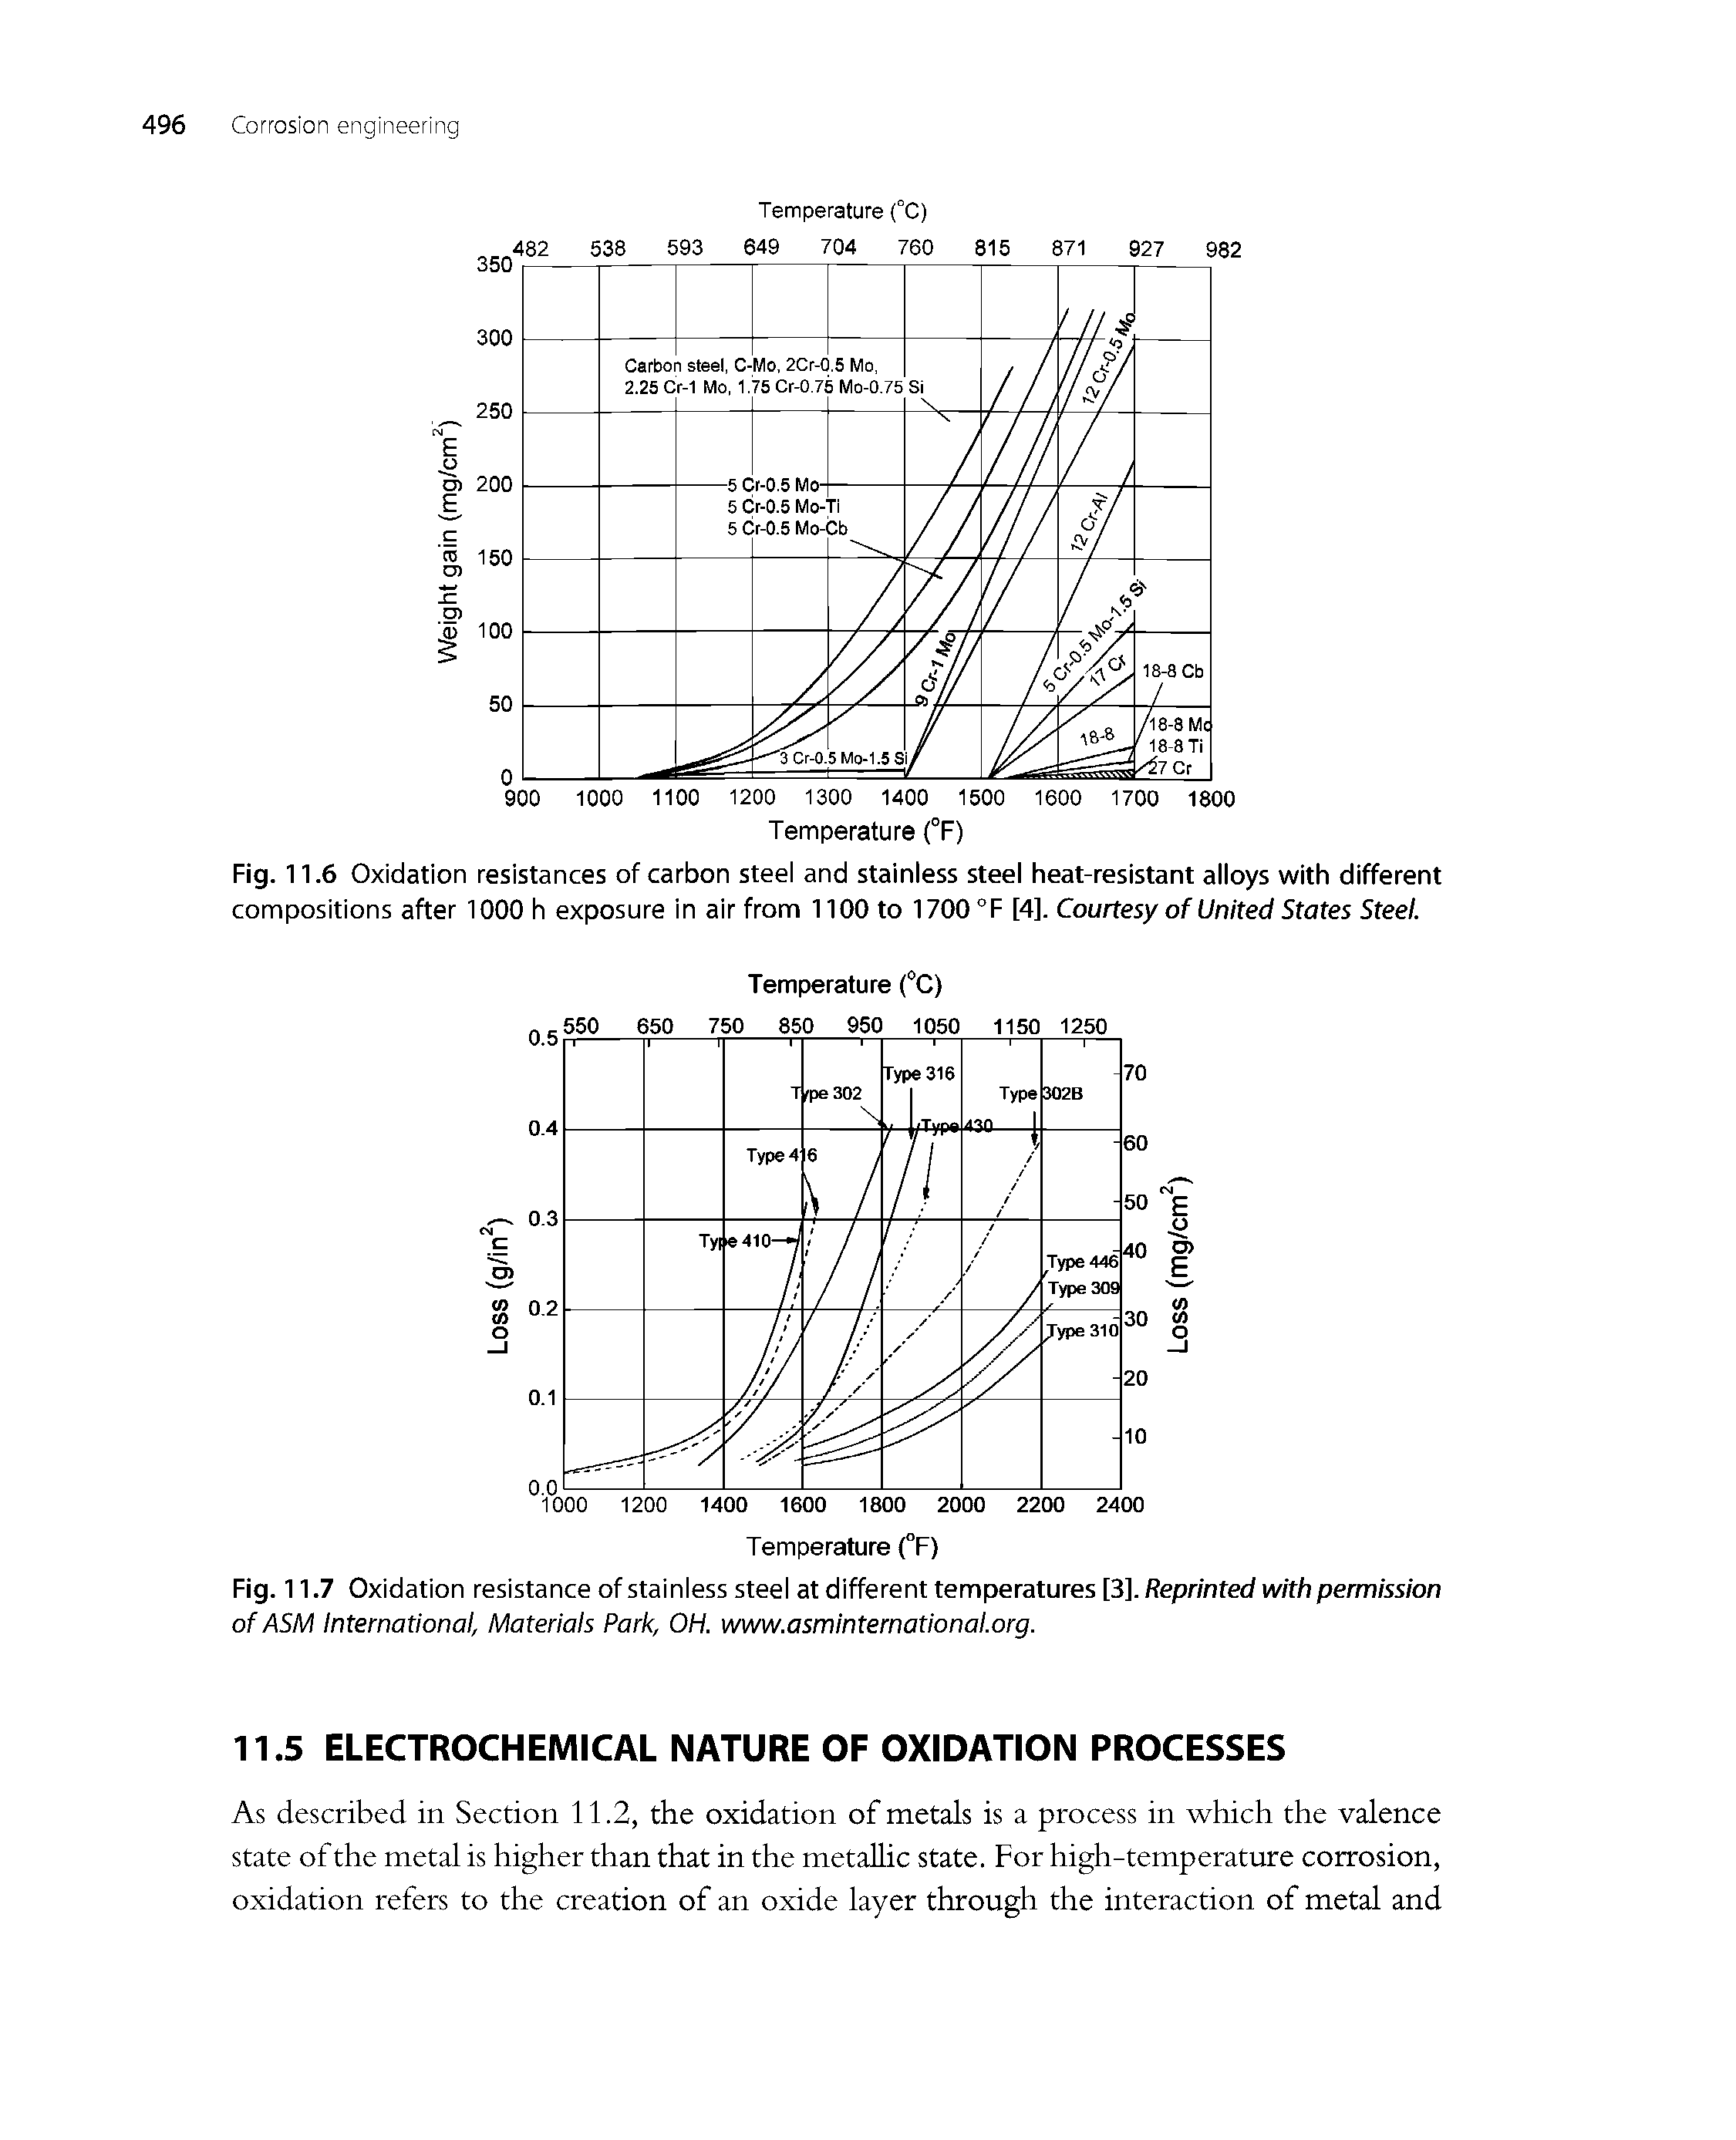 Fig. 11.6 Oxidation resistances of carbon steel and stainless steel heat-resistant alloys with different compositions after 1000 h exposure in air from 1100 to 1700 °F [4]. Courtesy of United States Steel.